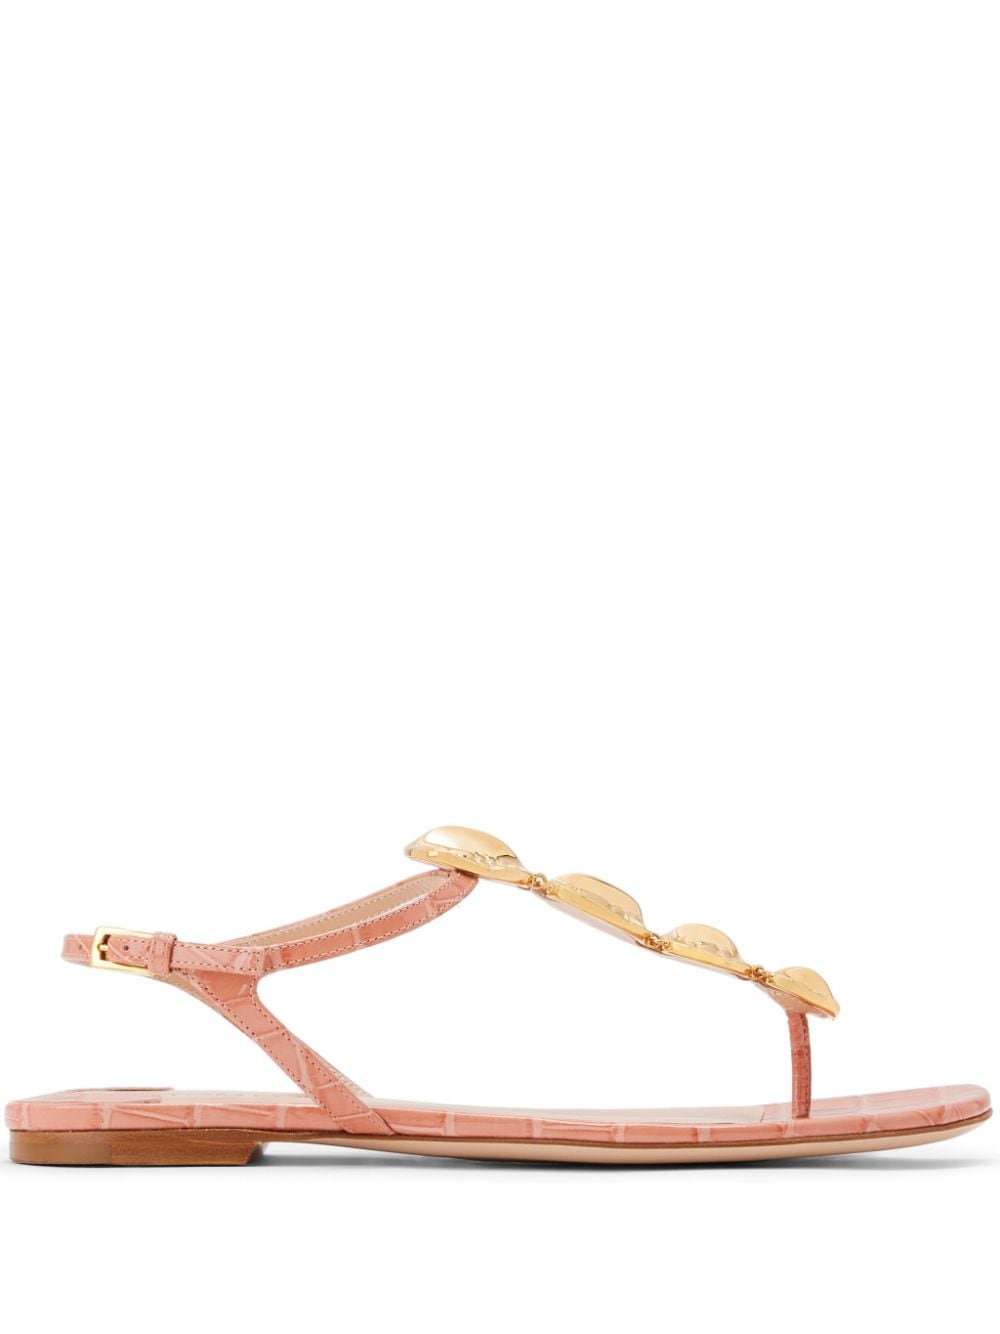 TOM FORD crocodile-embossed leather sandals - Pink von TOM FORD